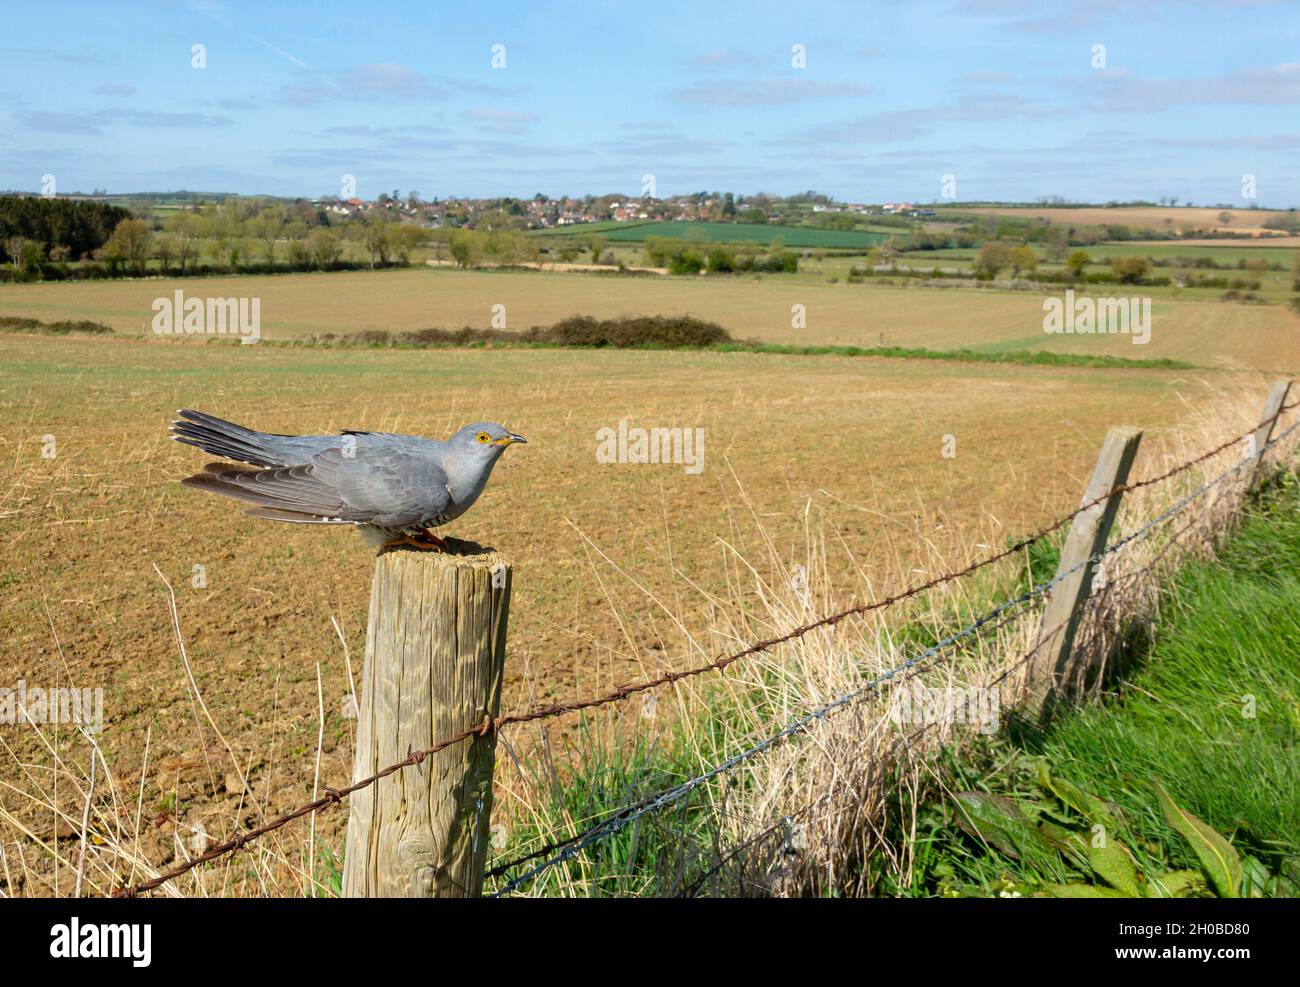 Cuckoo (Cuculus canorus) perched on a fence post in the British countryside Stock Photo